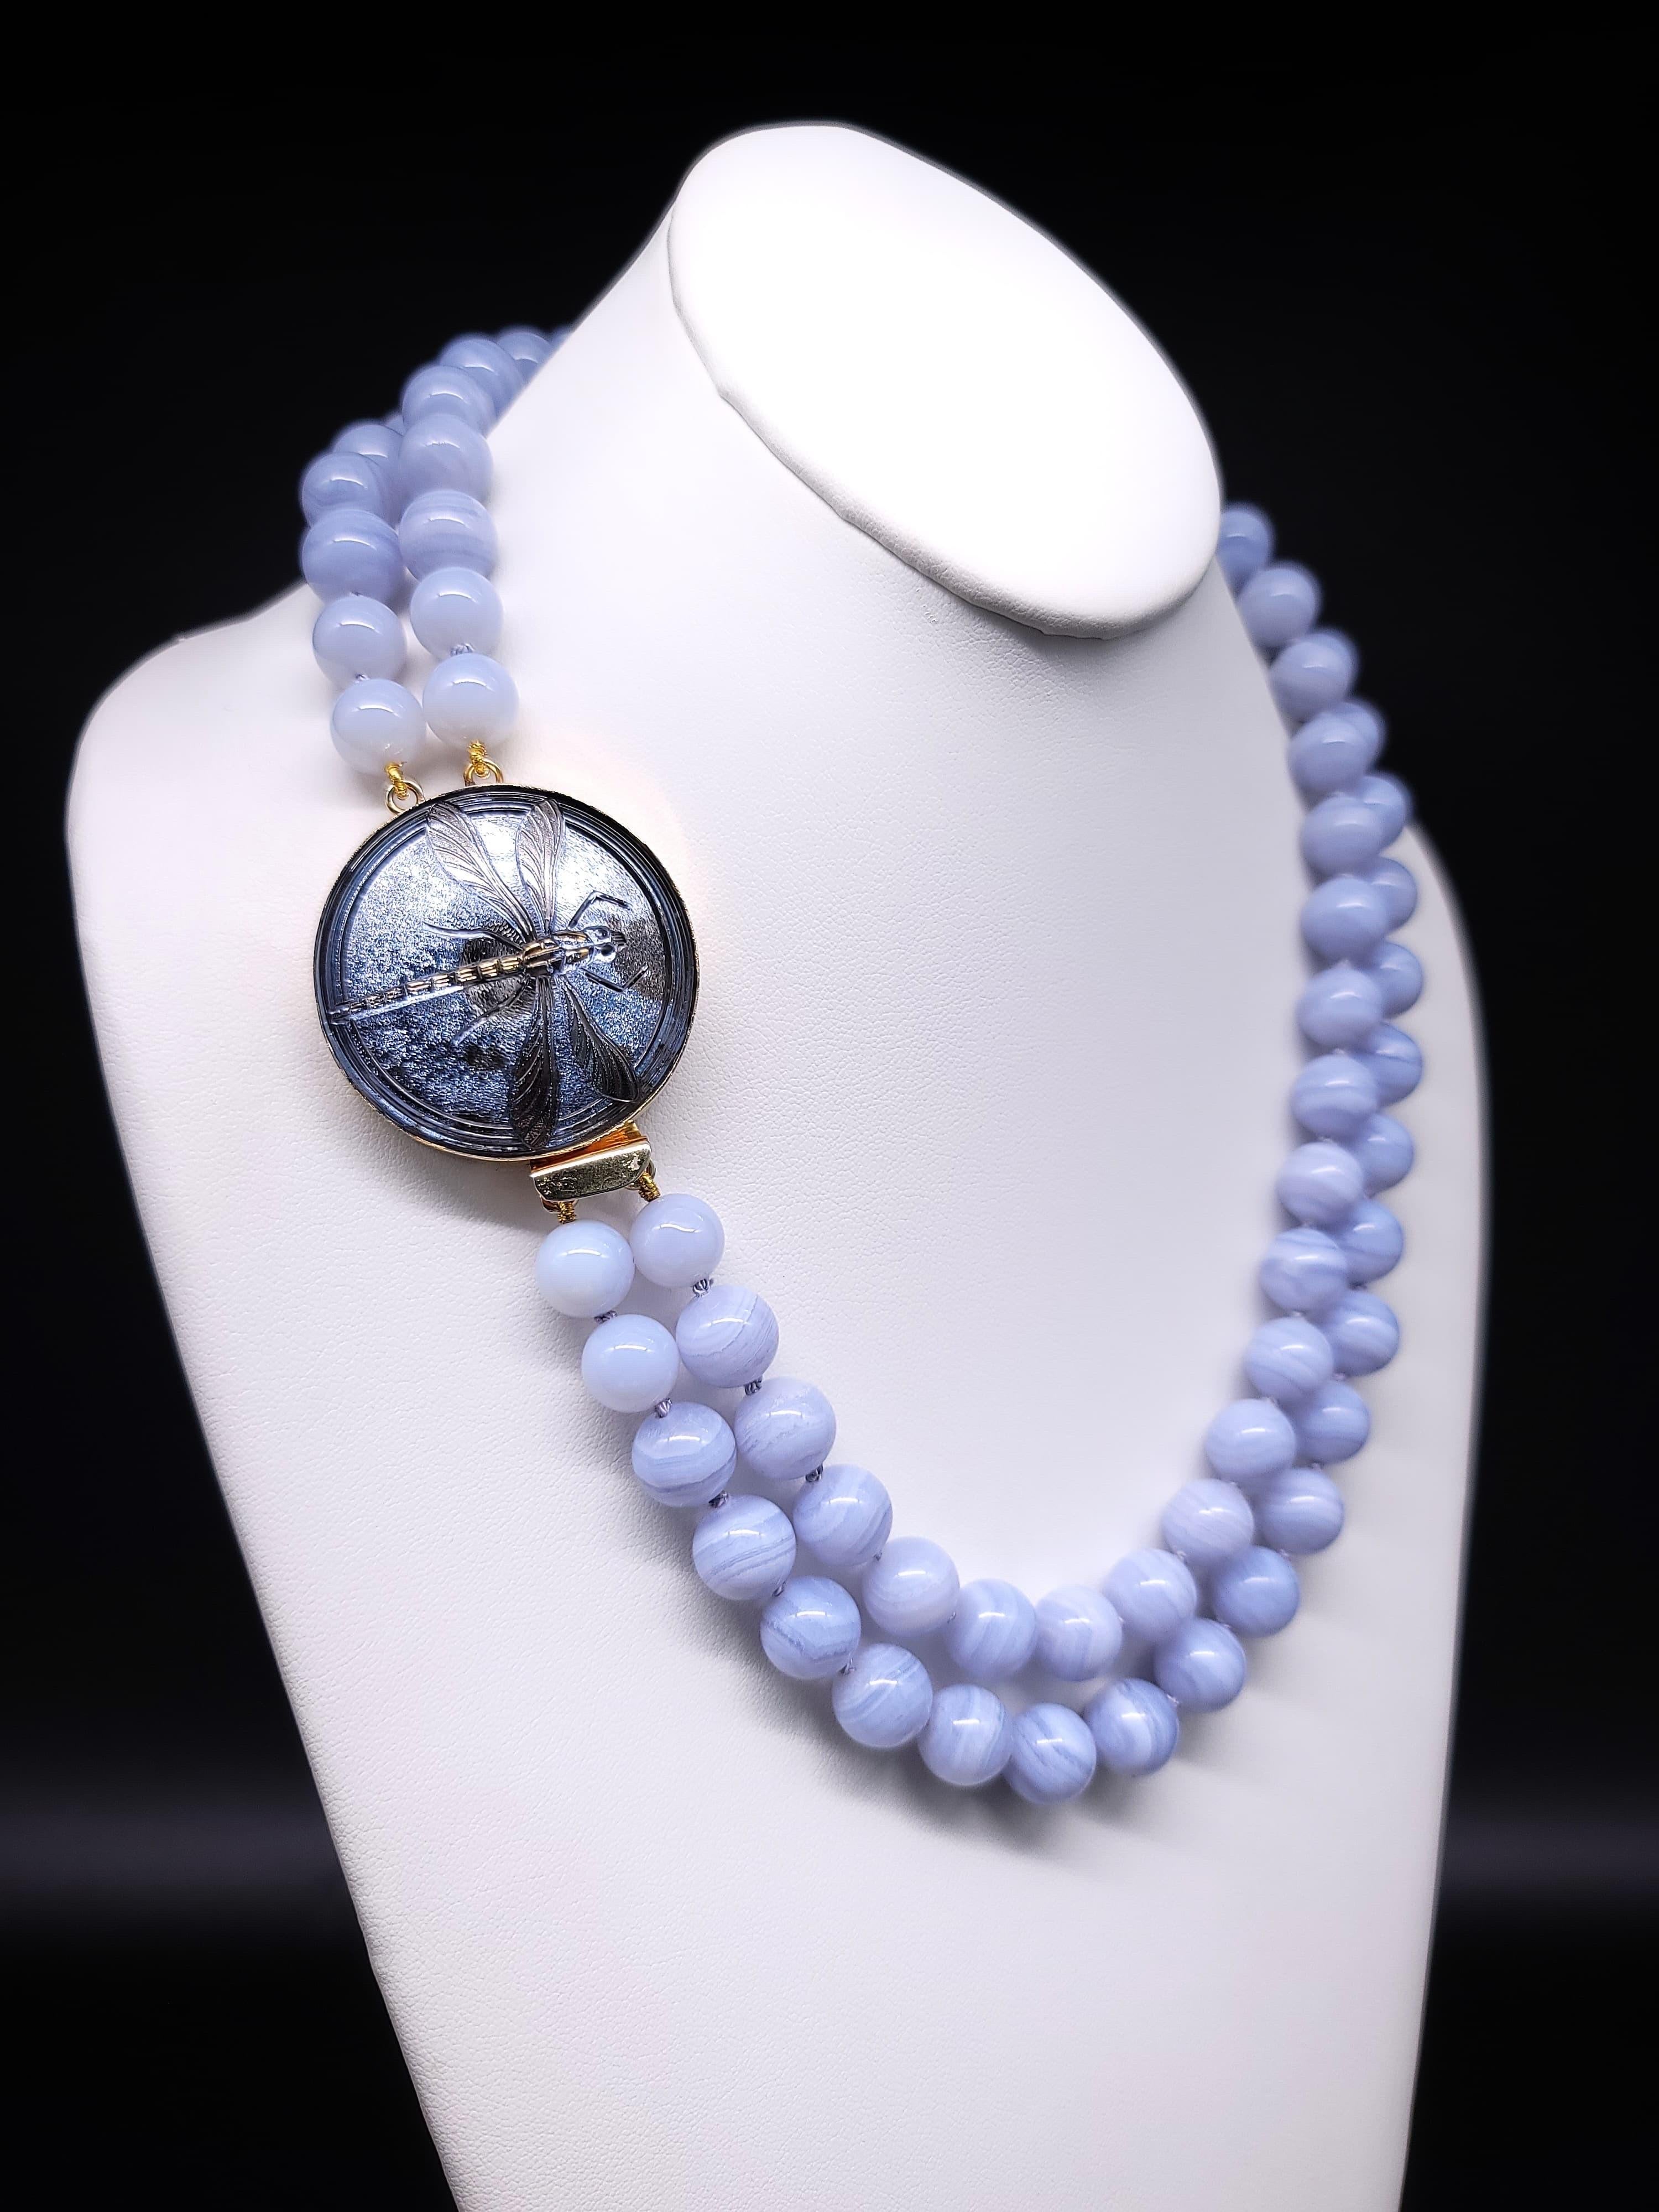 One-of-a-Kind

Indulge yourself in the ultimate luxury with our latest Blue Lace Agate gemstone necklace addition, a stunning and unique cousin to Chalcedony. The soft blue hue of the natural blue lace agate and the subtle banding of this gemstone